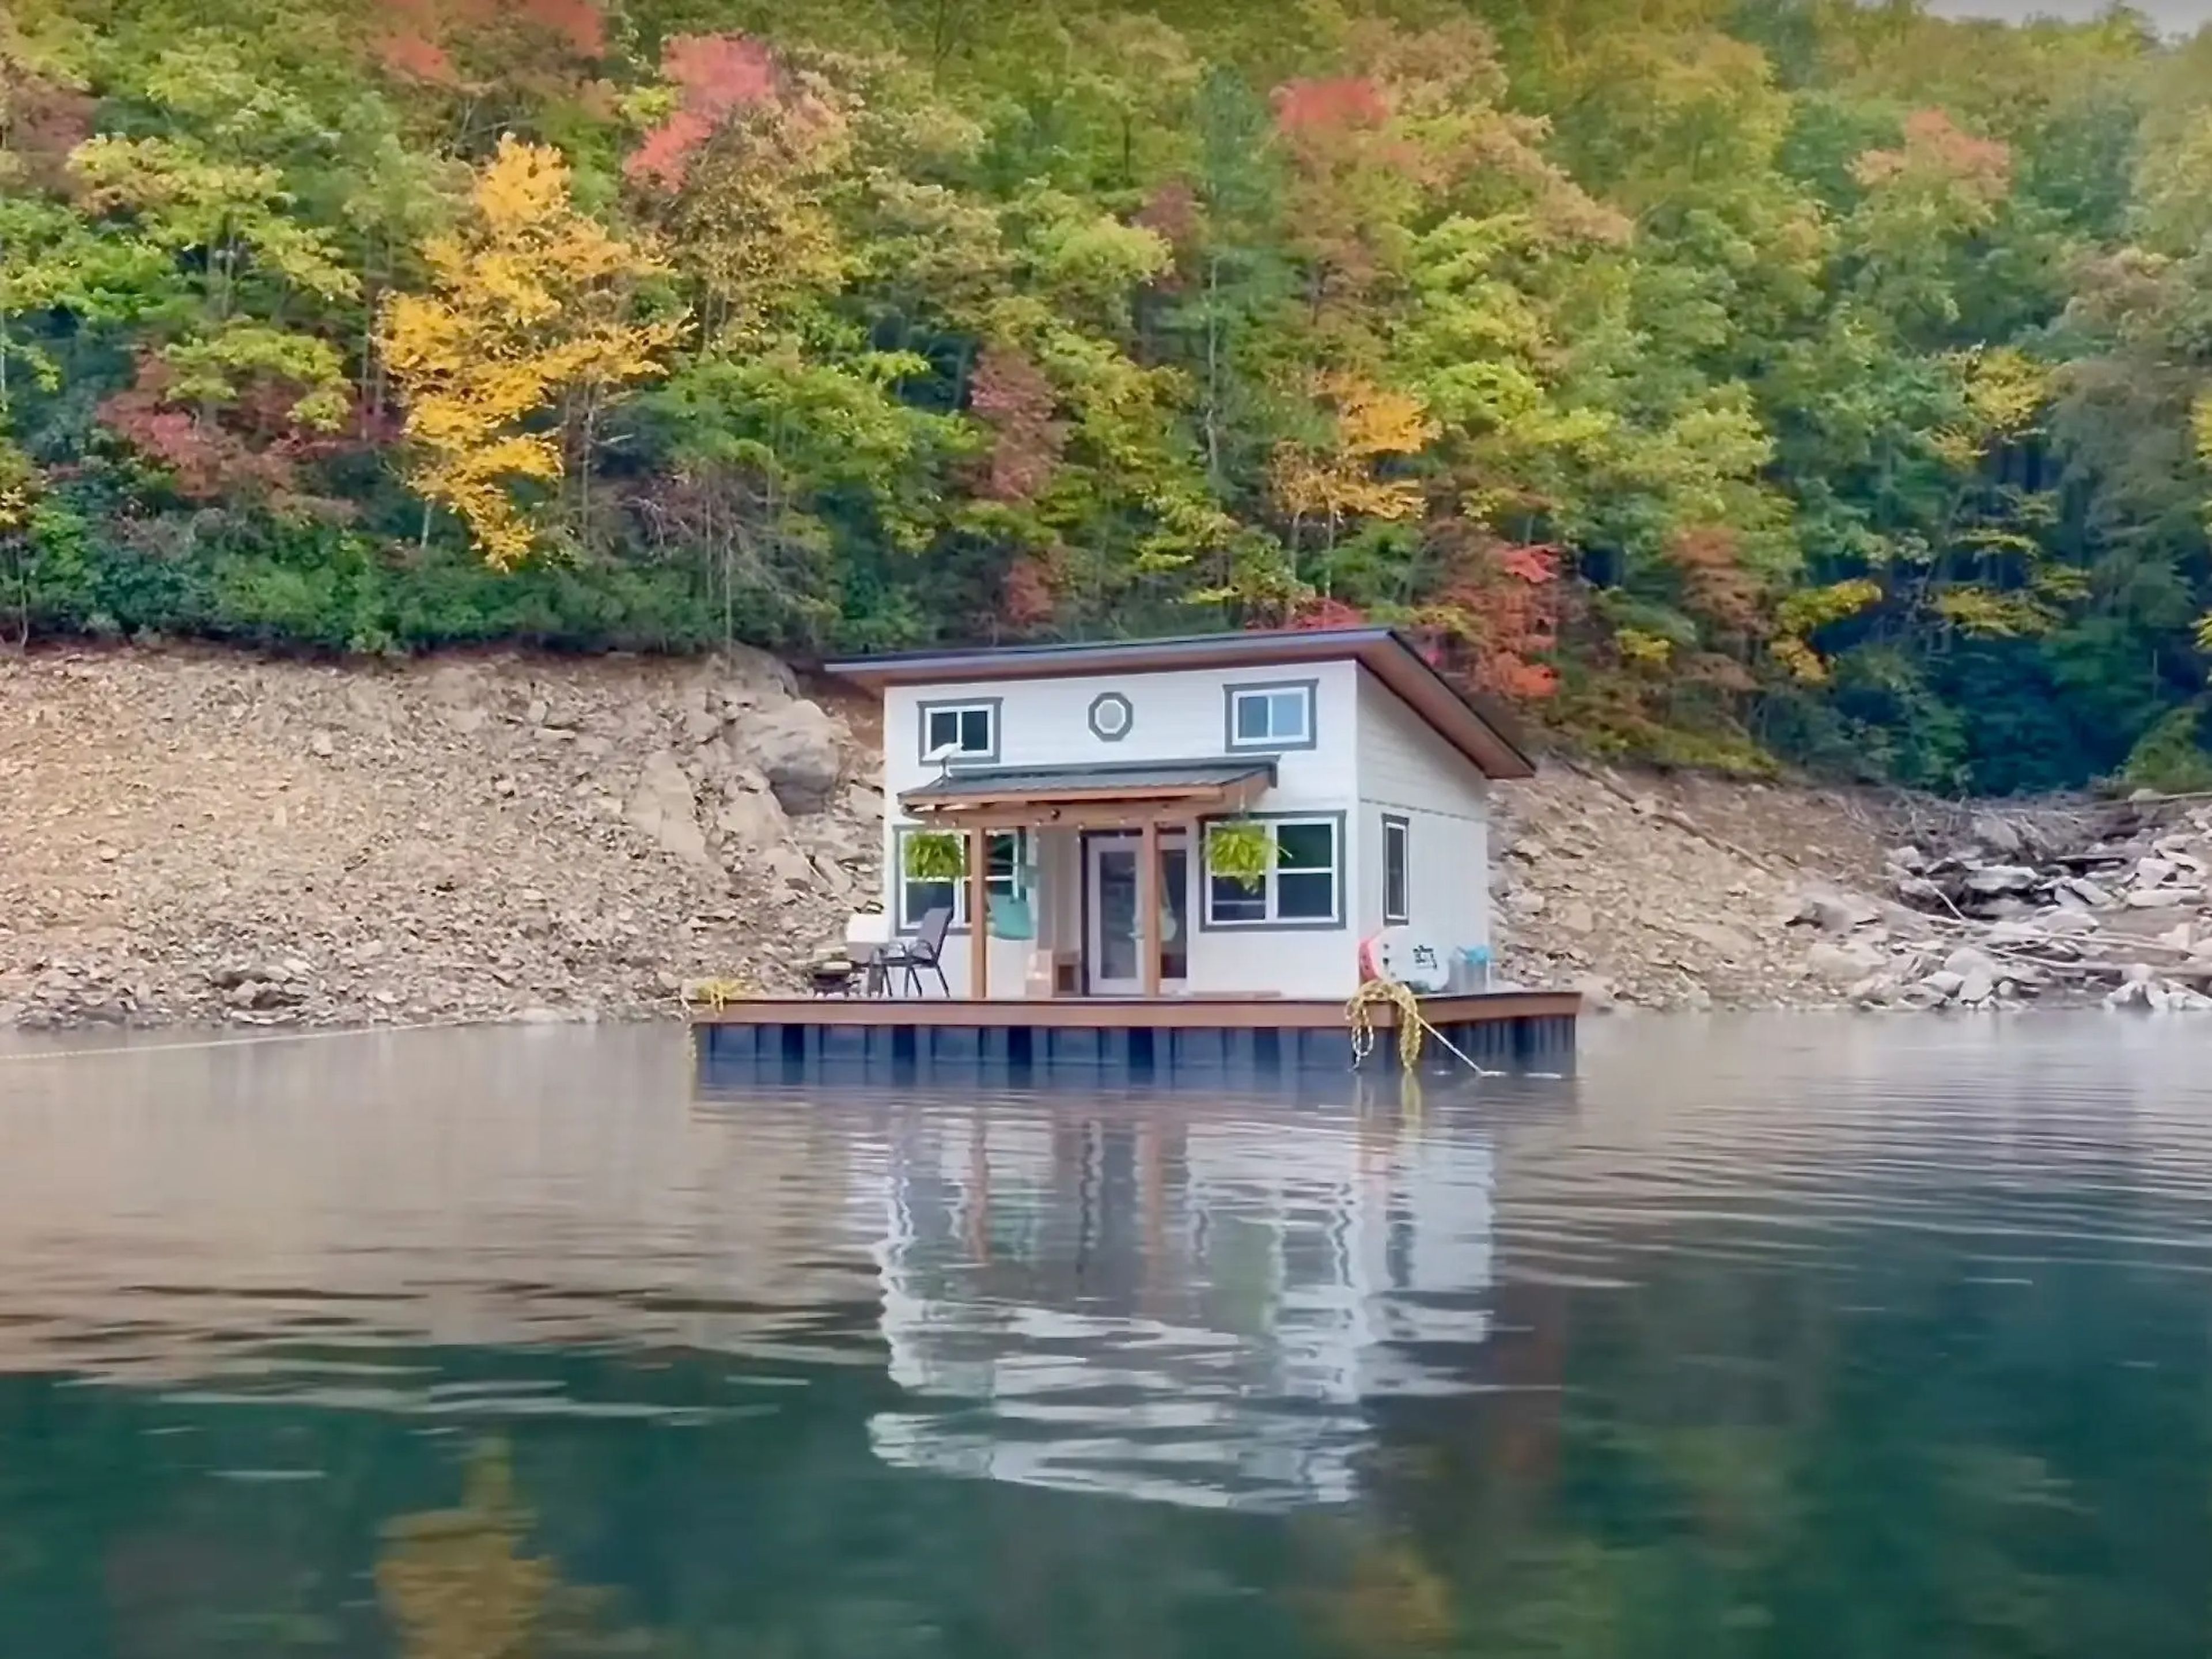 The couple built a floating home in the middle of a lake in North Carolina.